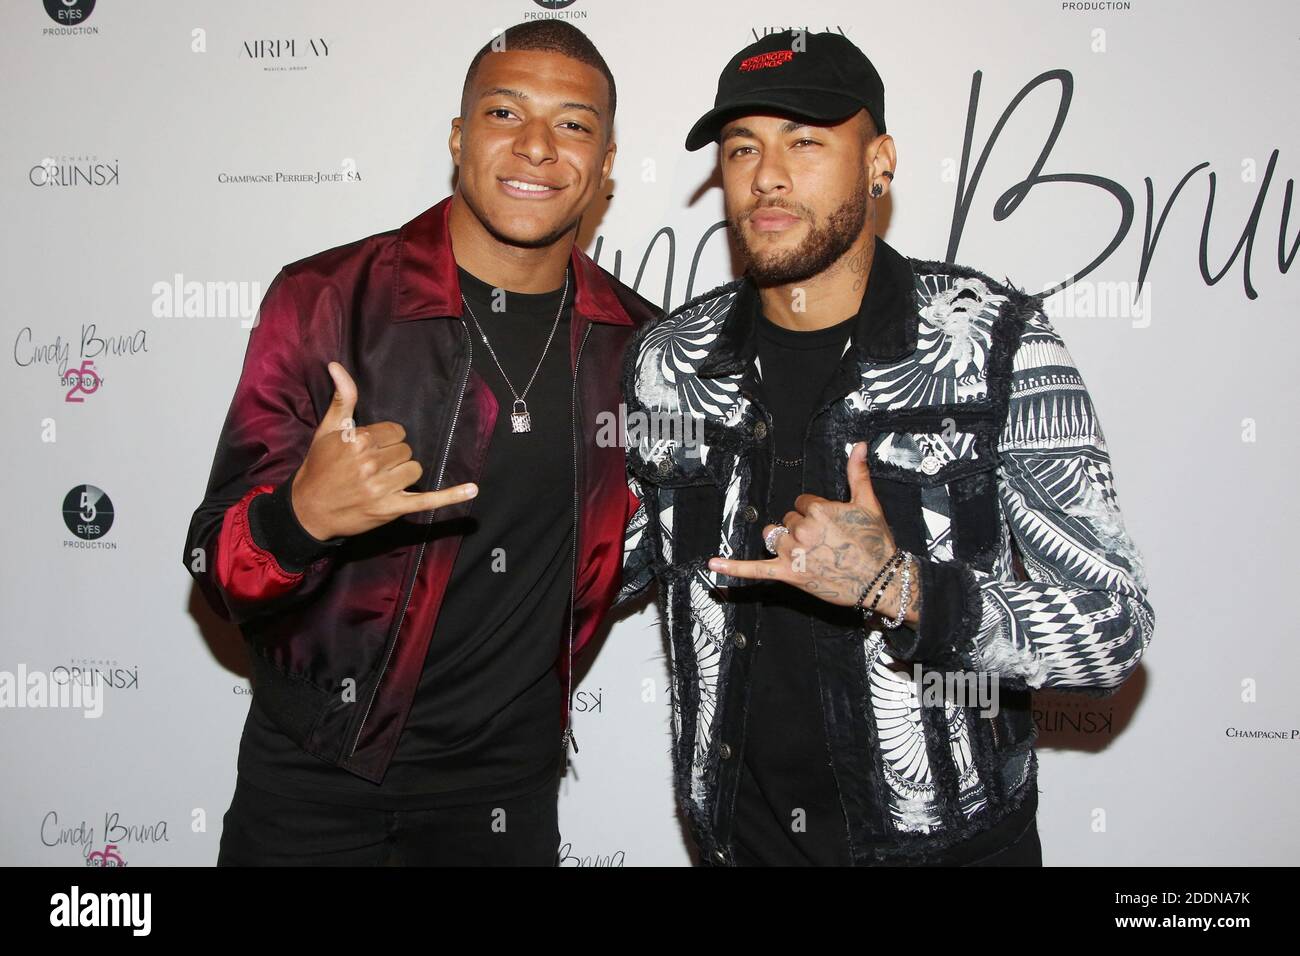 Kylian Mbappe and Neymar attending party to celebrate Cindy Bruna's 25th  birthday organized by Five Eyes Production held at ''Lutetia Hotel" in  Paris, France on September 28, 2019. Photo by Jerome Domine/ABACAPRESS.COM